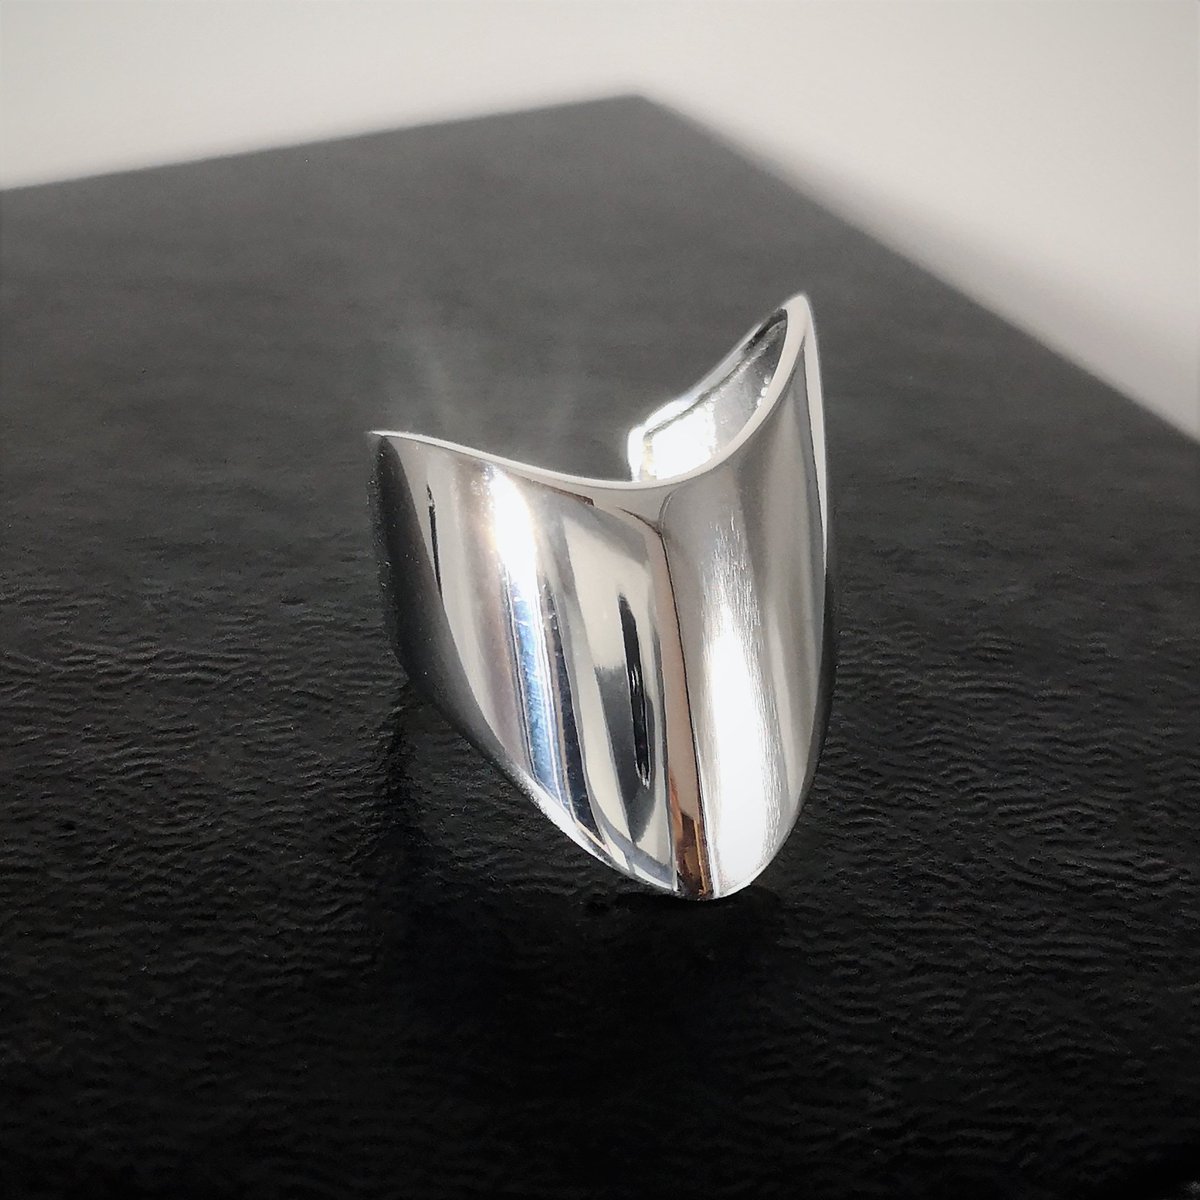 Sterling Silver Wide Band Open Ring, Geometric Sterling Silver Ring, Adjustable Ring, Women Ring, Men Ring, Statement Ring, Gift for Her #silver #unisexadults #sterlingsilverring #widebandring #openring #geometricring #adjustablering #womenring #menring etsy.me/3oK1HBn